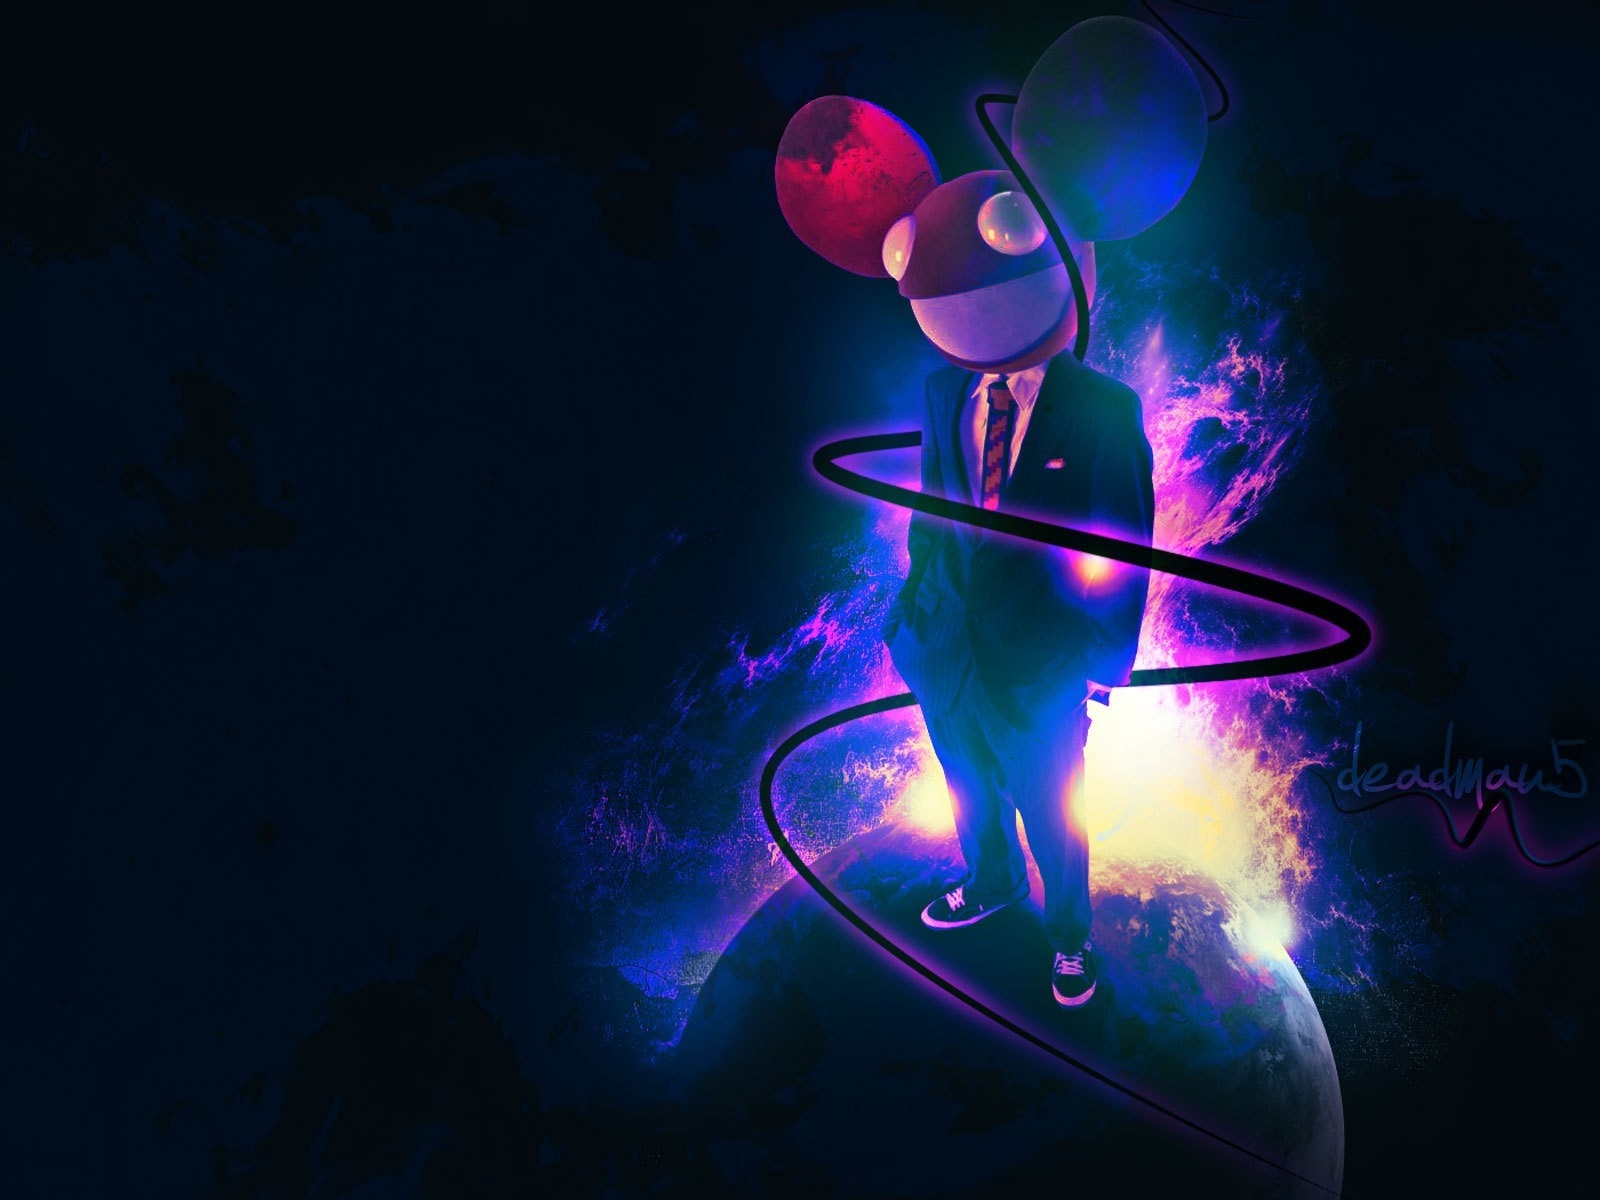 Deadmau5 Poster for 1600 x 1200 resolution